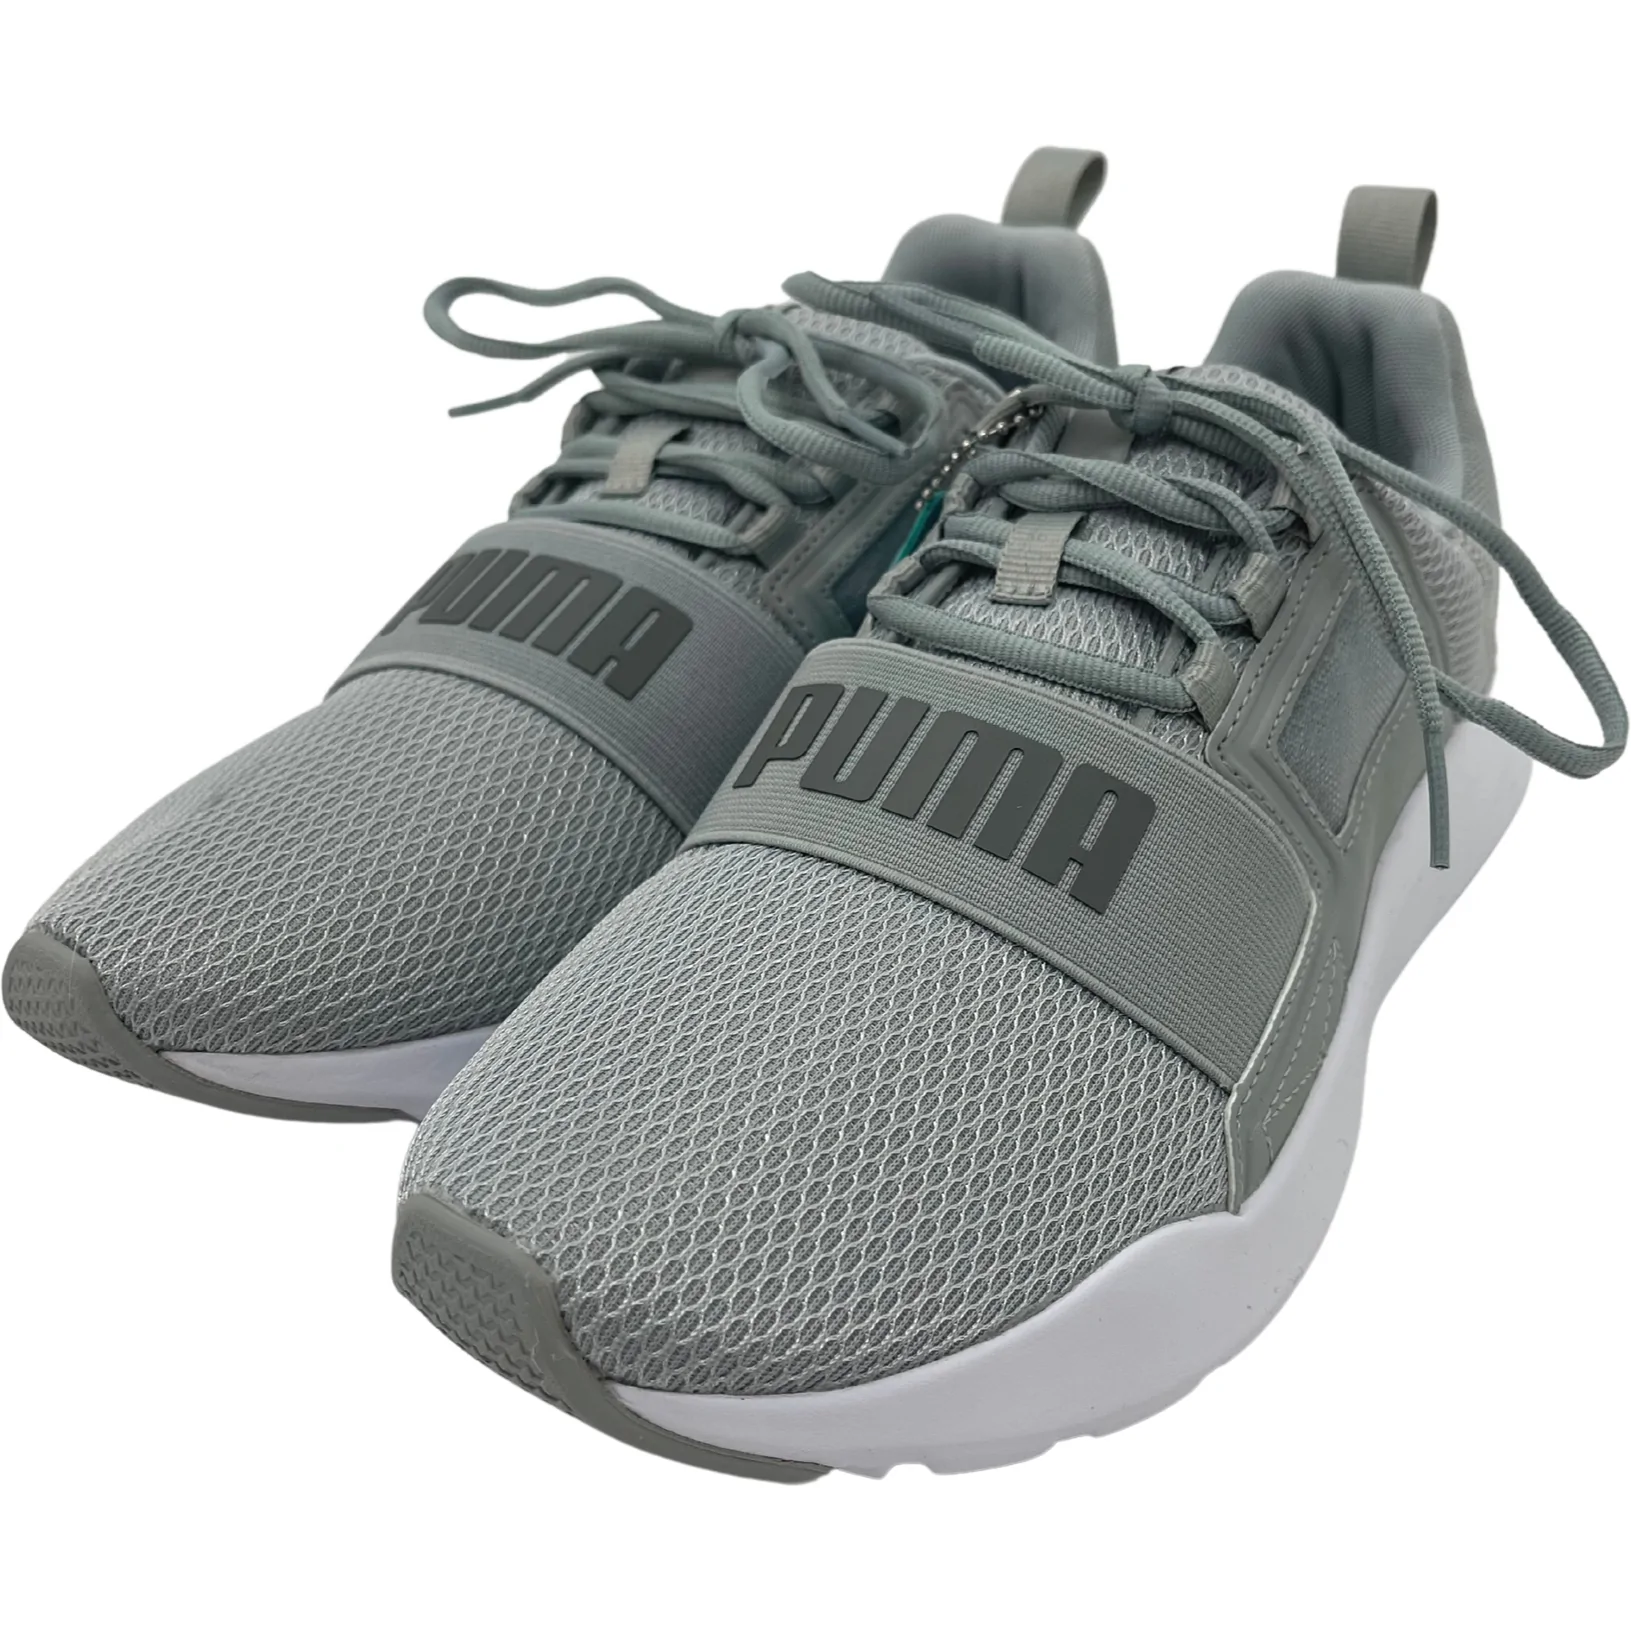 Puma Men's Running Shoes / Puma Wired Cage / Light Grey / Size 10 **No Tags**